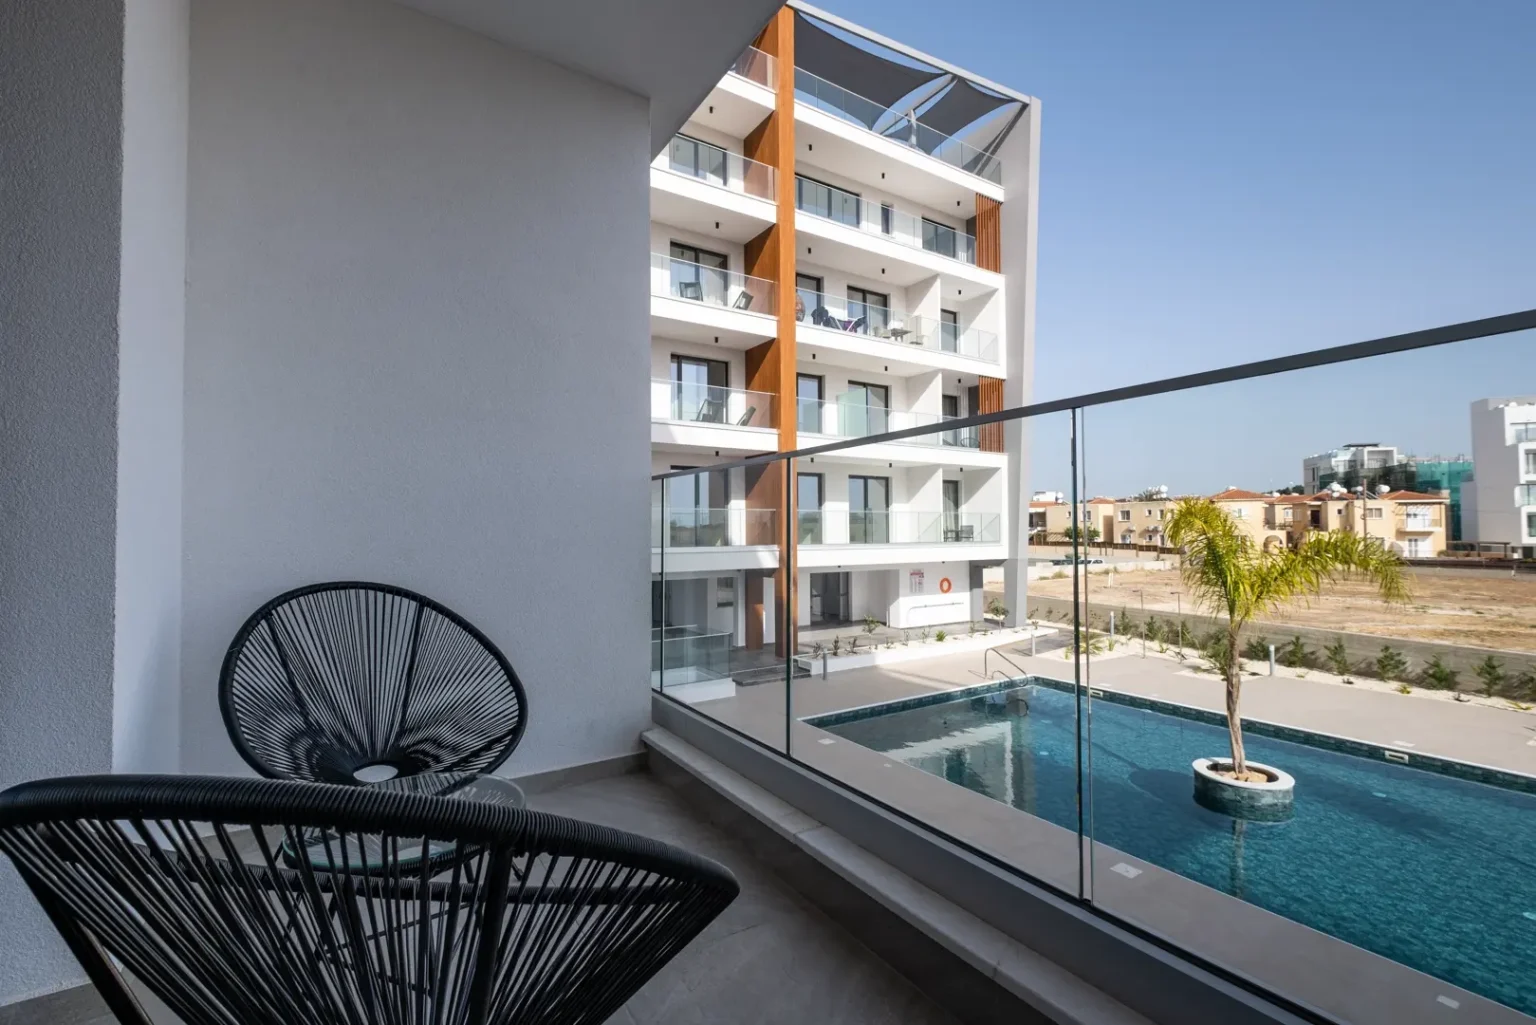 1 Bedroom Apartment for Rent in Paphos